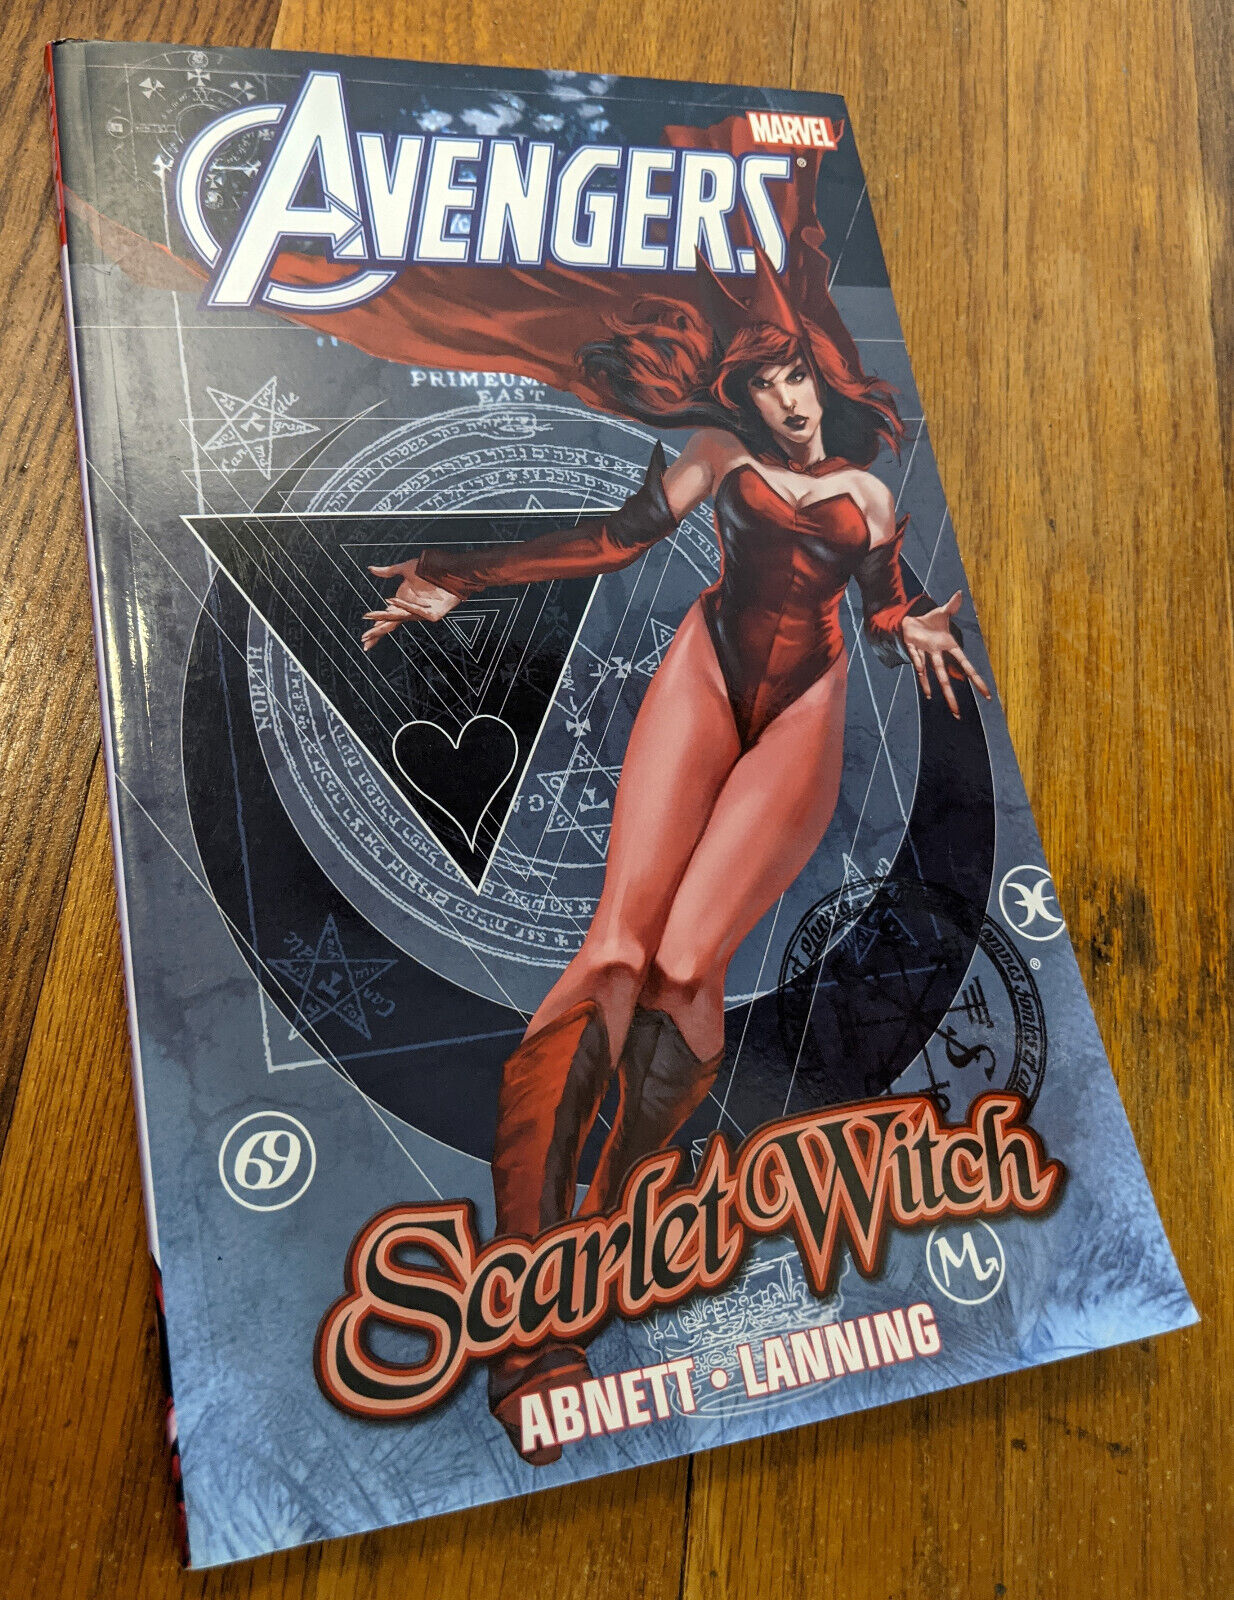 Marvel Comics Avengers Scarlet Witch by Dan Abnett & Andy Lanning 2015 1st Print